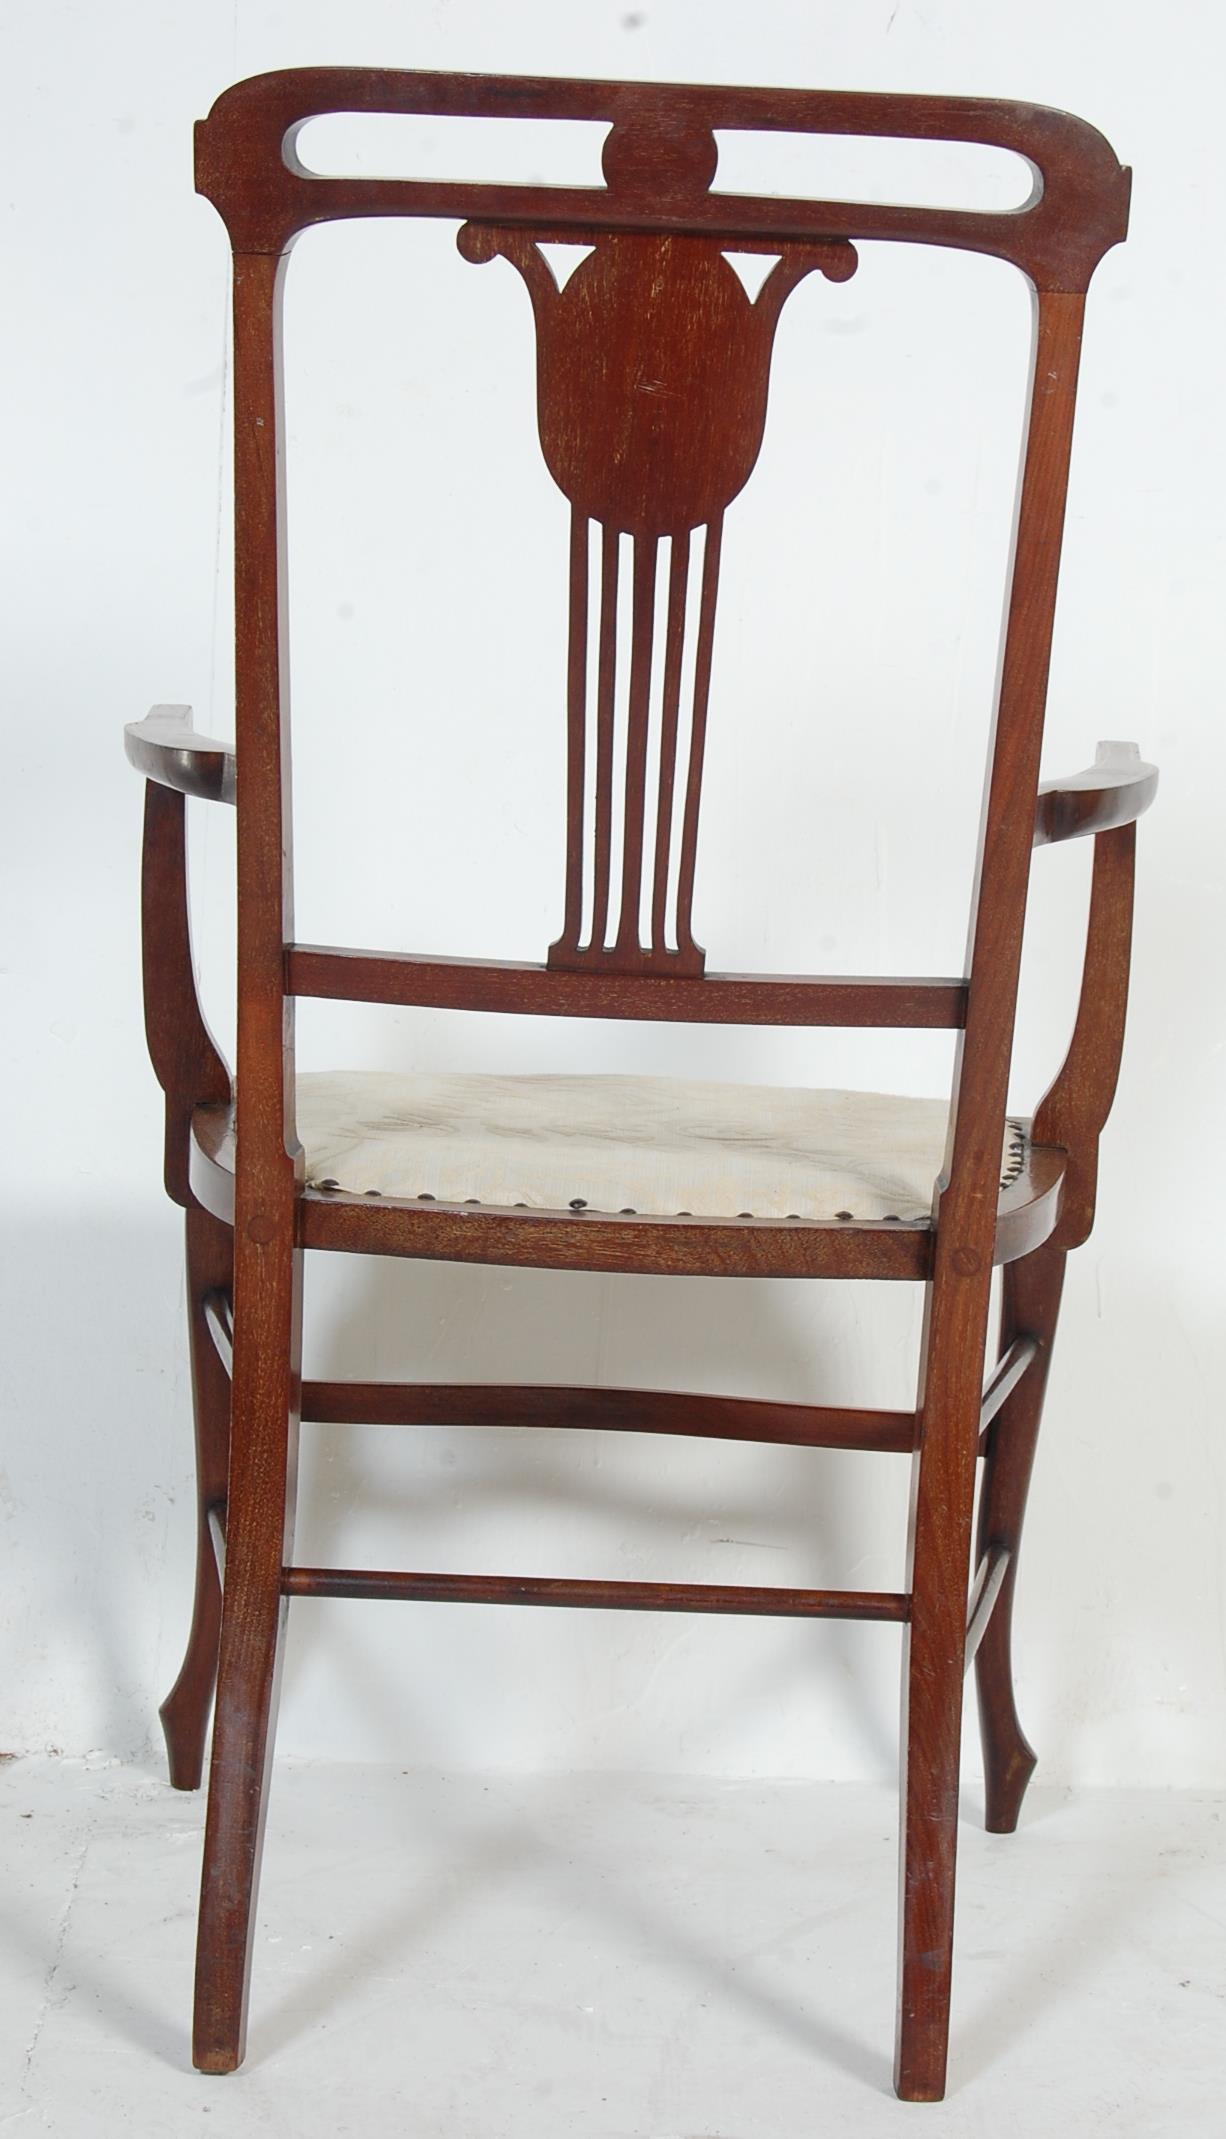 EDWARDIAN MARQUETRY INLAID MAHOGANY ARMCHAIR - Image 5 of 6